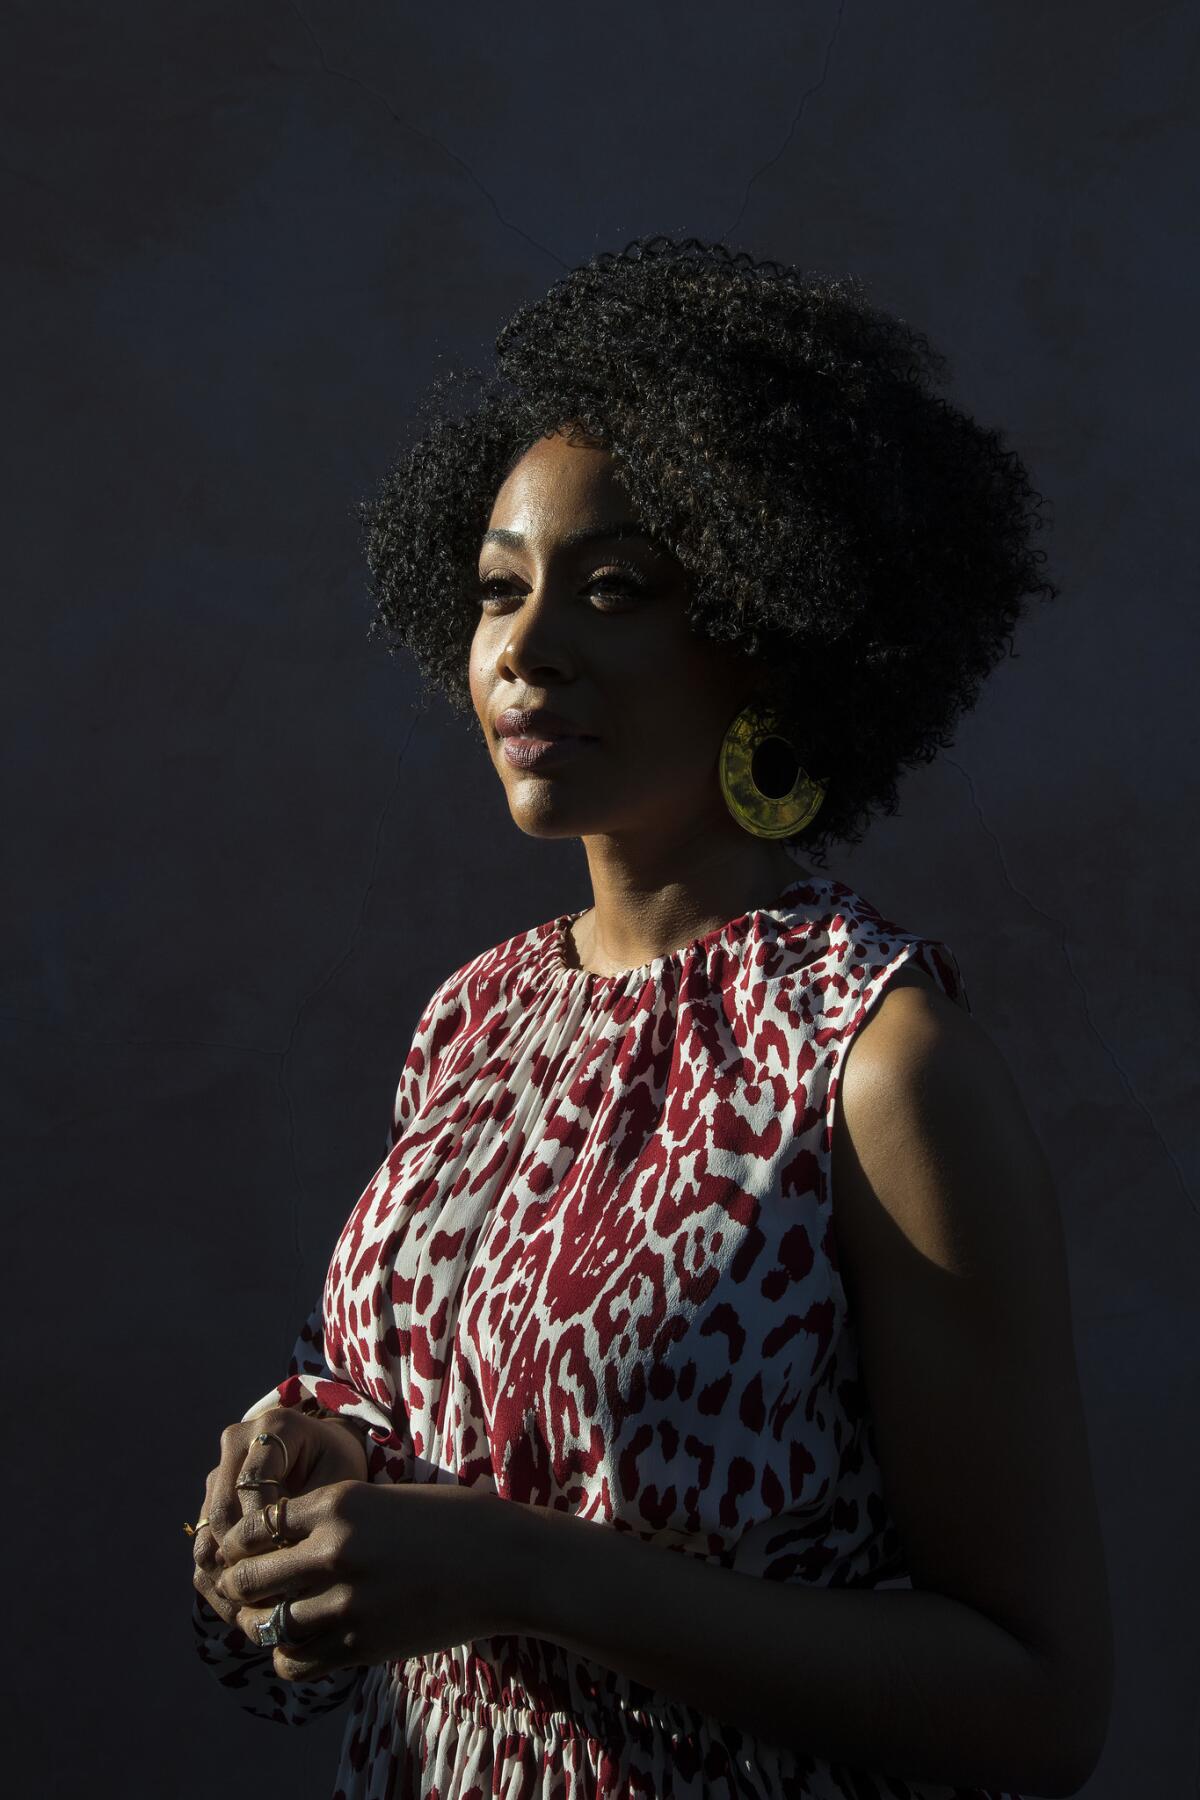 Simone Missick portrays a police detective in Netflix's "Luke Cage" series.